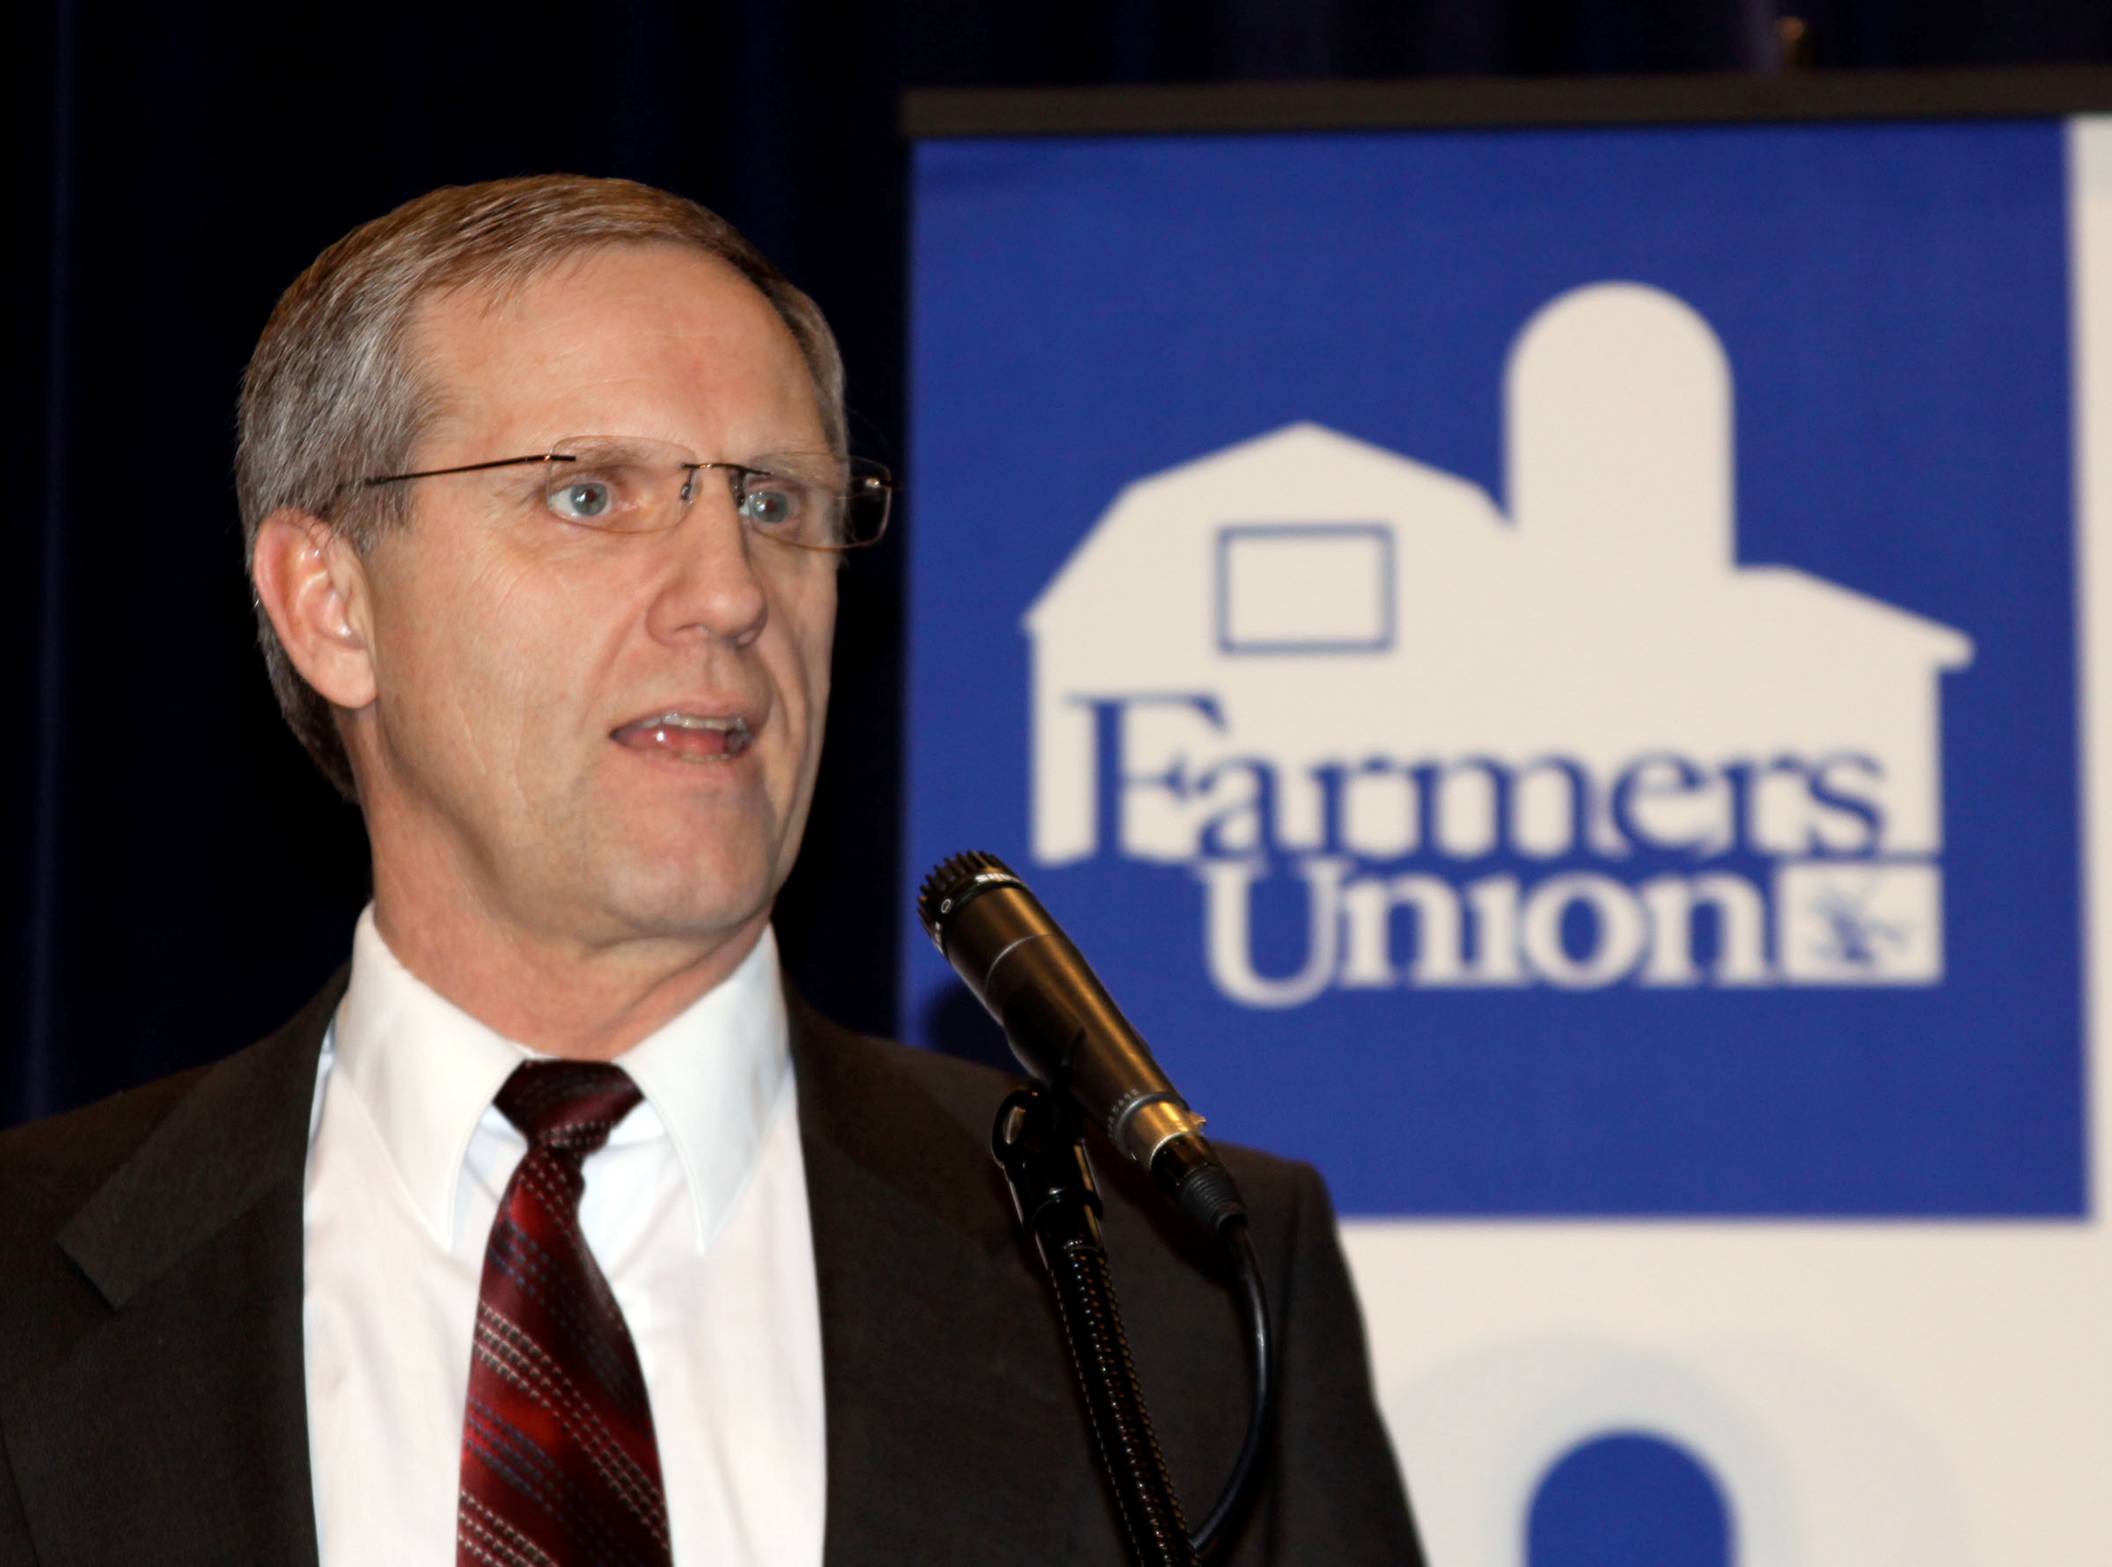 NFU's Roger Johnson Tells EPA to Follow the Law on the Renewable Fuel Standard